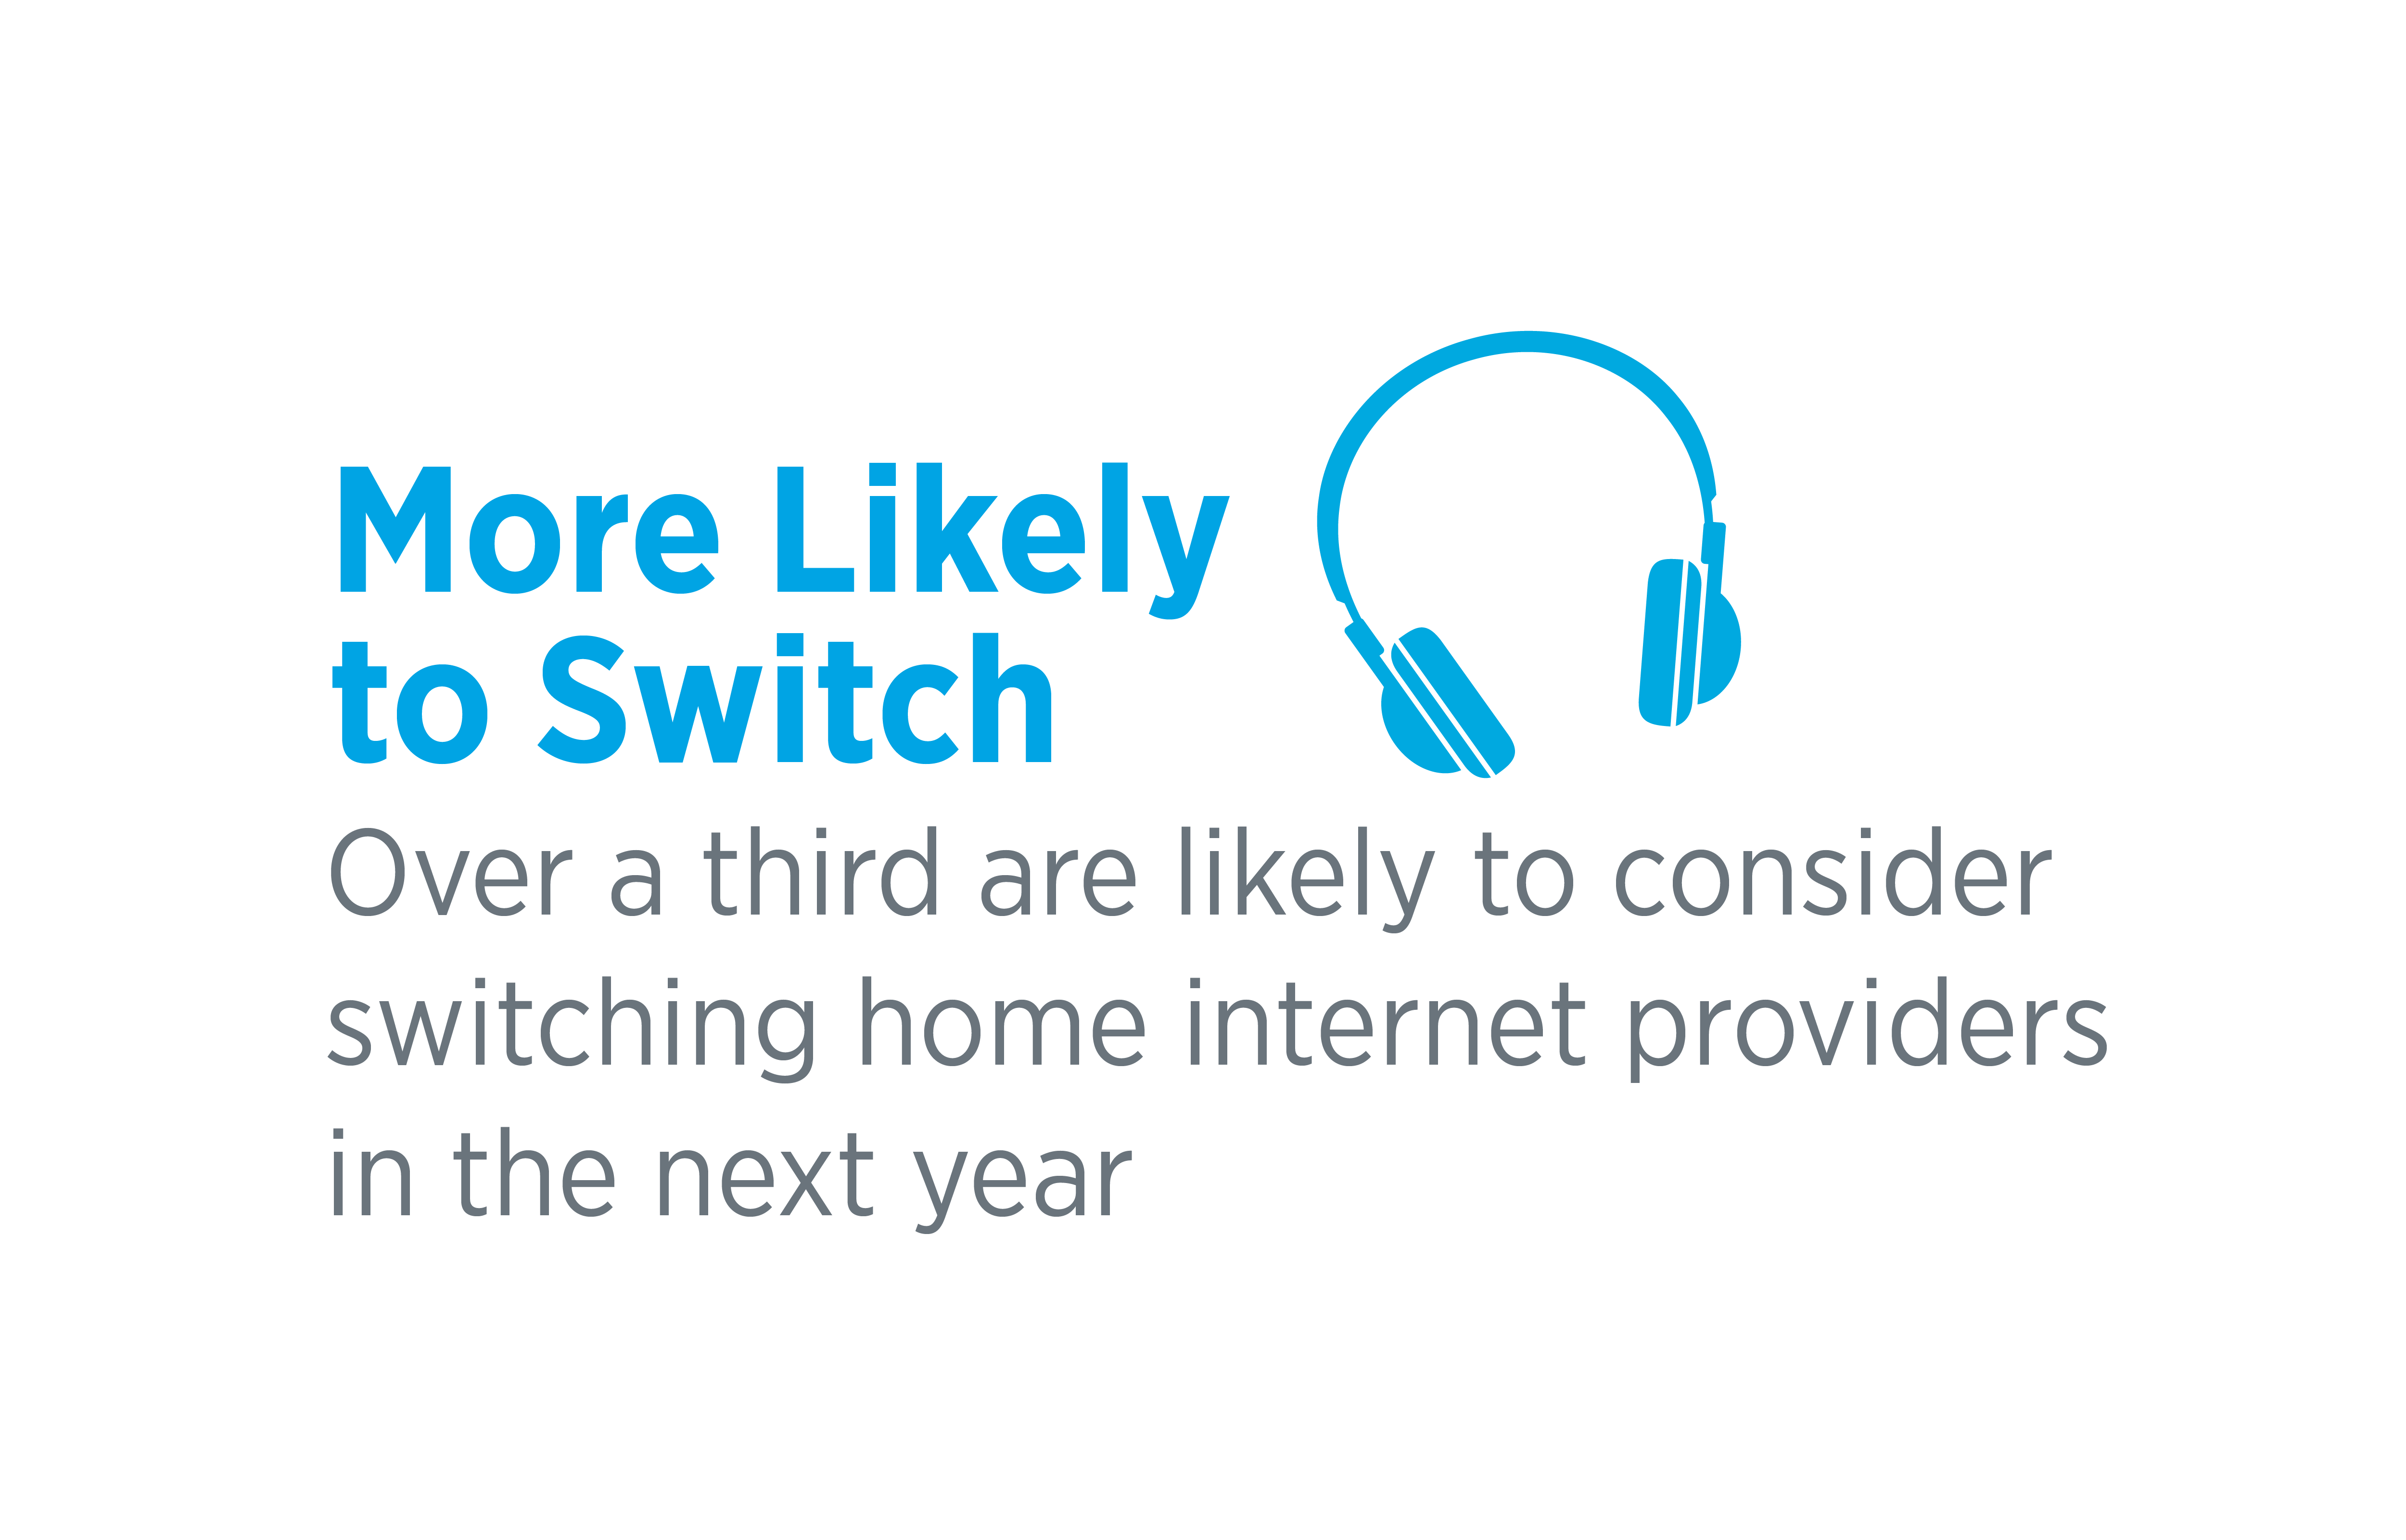 over a third are likely to consider switching home internet providers in the next year